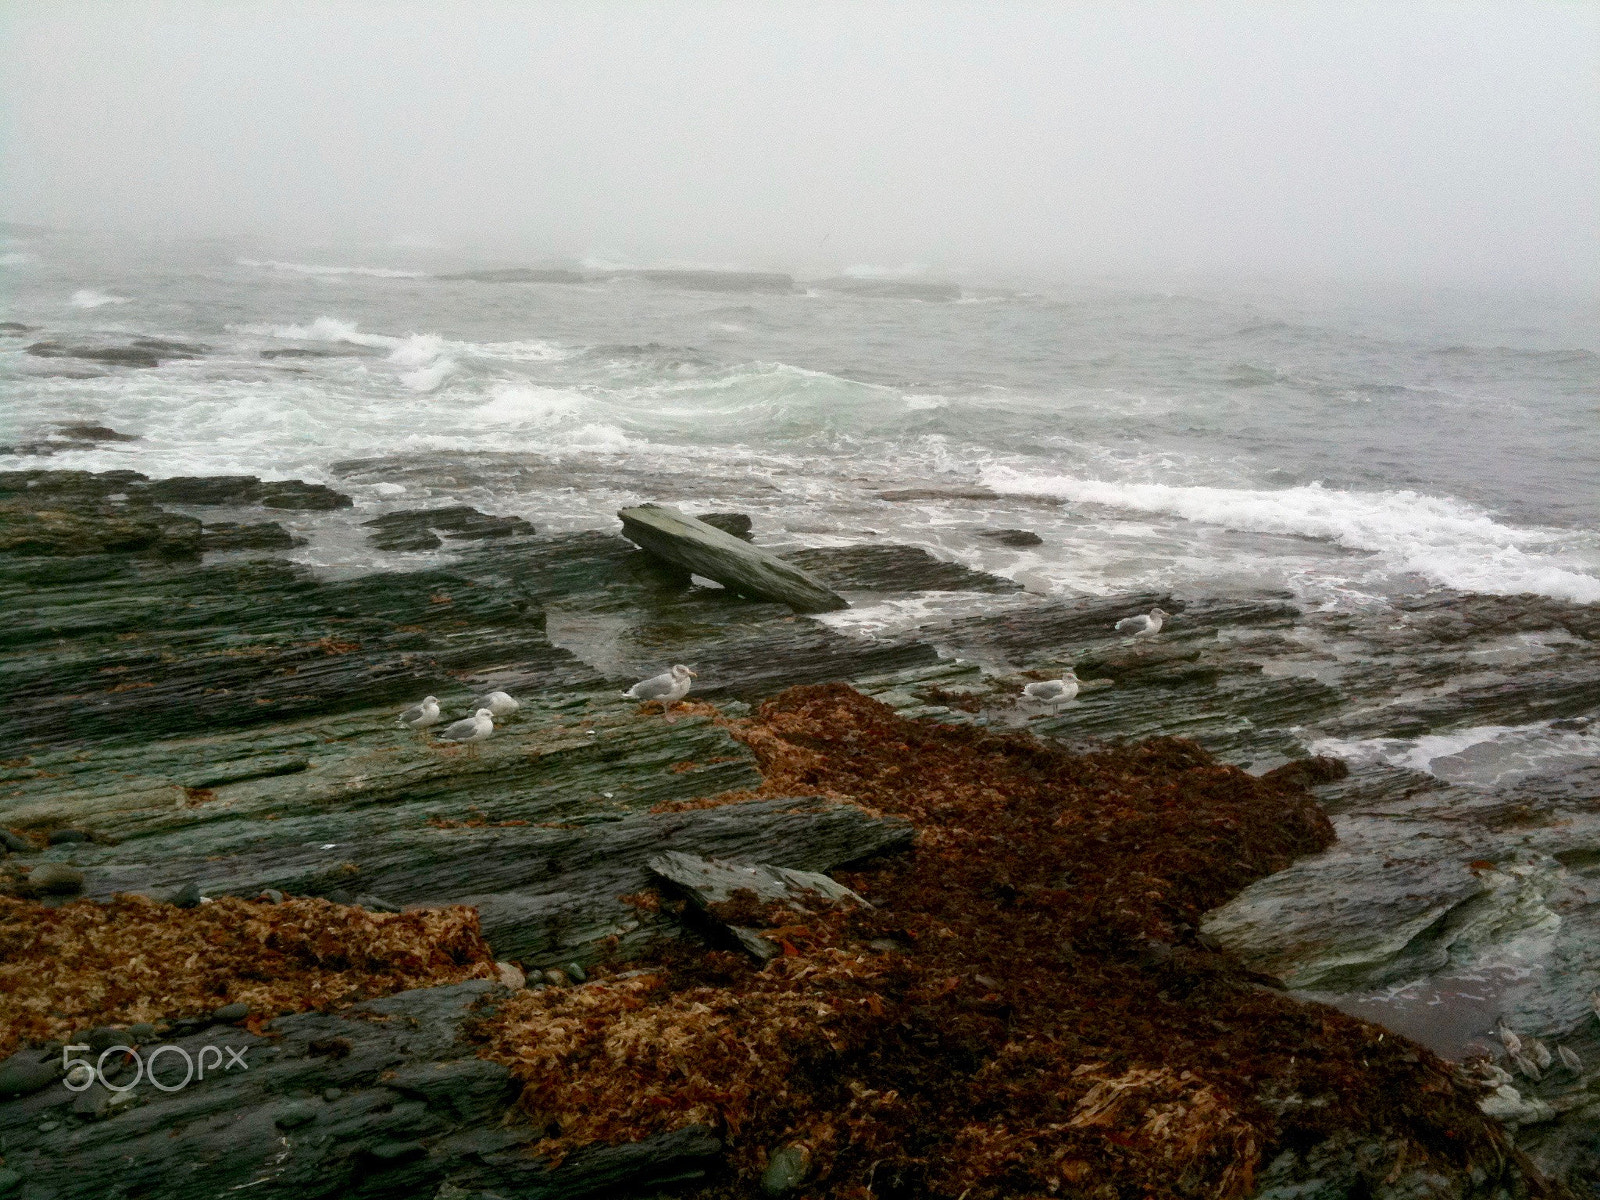 Apple iPhone 3GS sample photo. New england fog rolling in over the ocean in fall photography